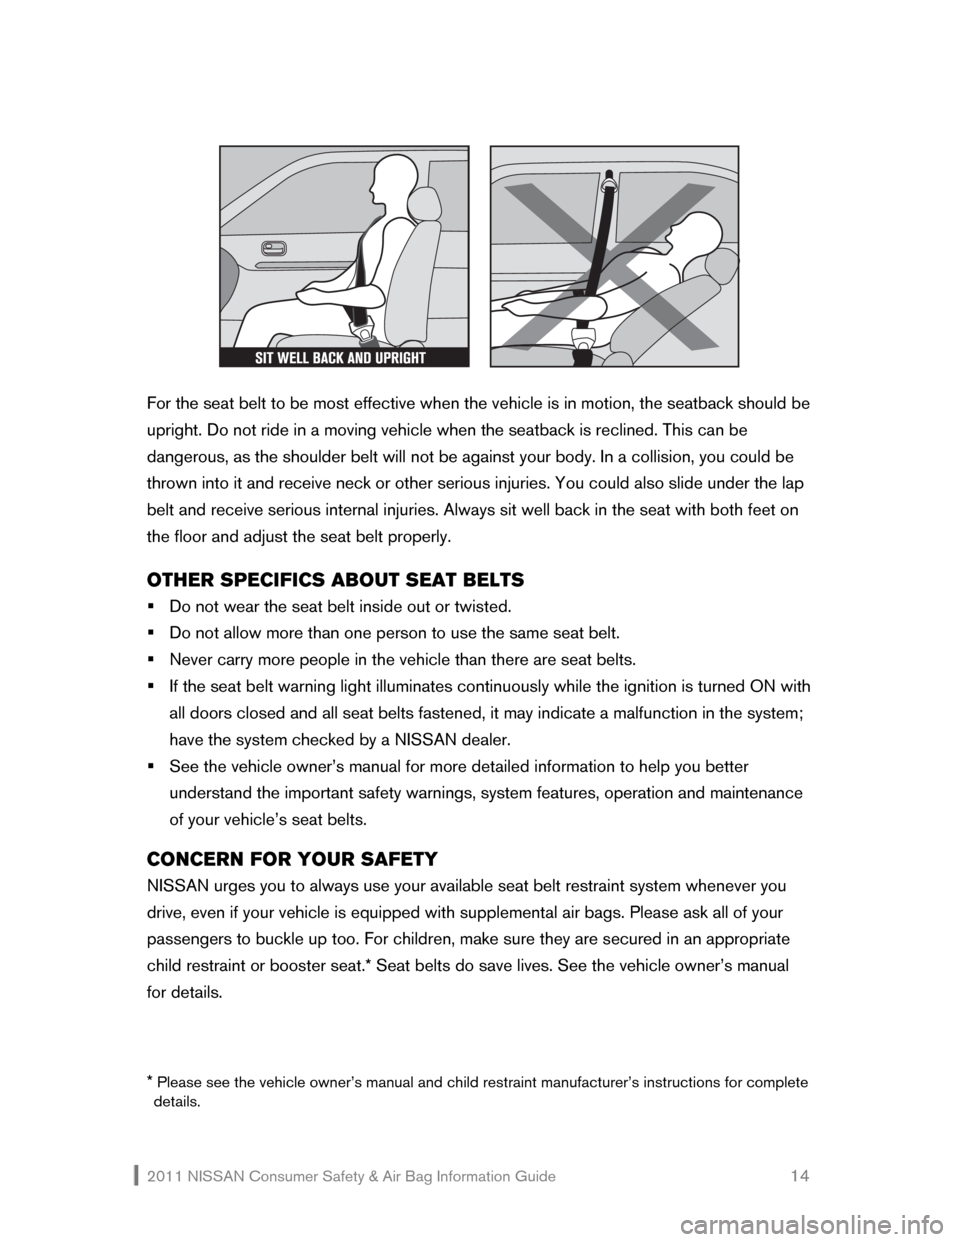 NISSAN CUBE 2011 3.G Consumer Safety Air Bag Information Guide 2011 NISSAN Consumer Safety & Air Bag Information Guide                                                       14 
 
 
 
For the seat belt to be most effective when the vehicle is in motion, the seatba